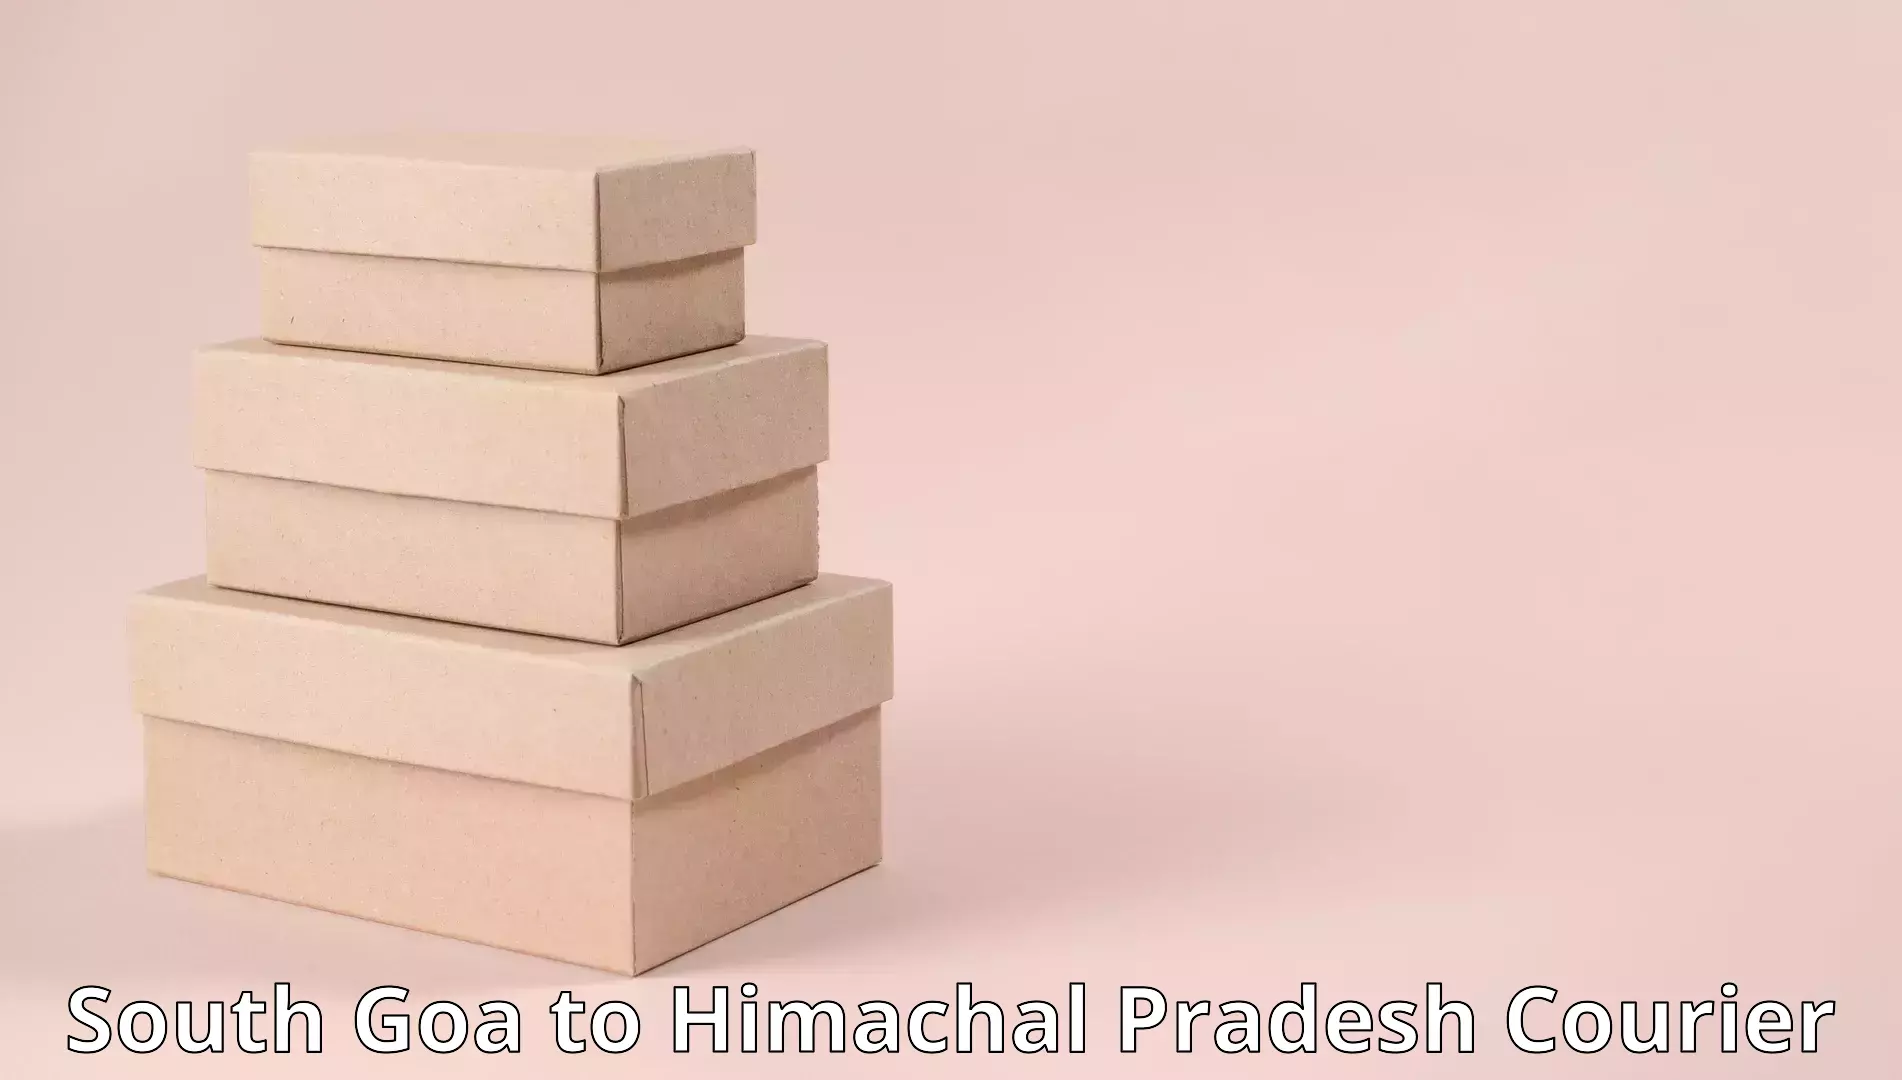 Dependable moving services South Goa to Himachal Pradesh